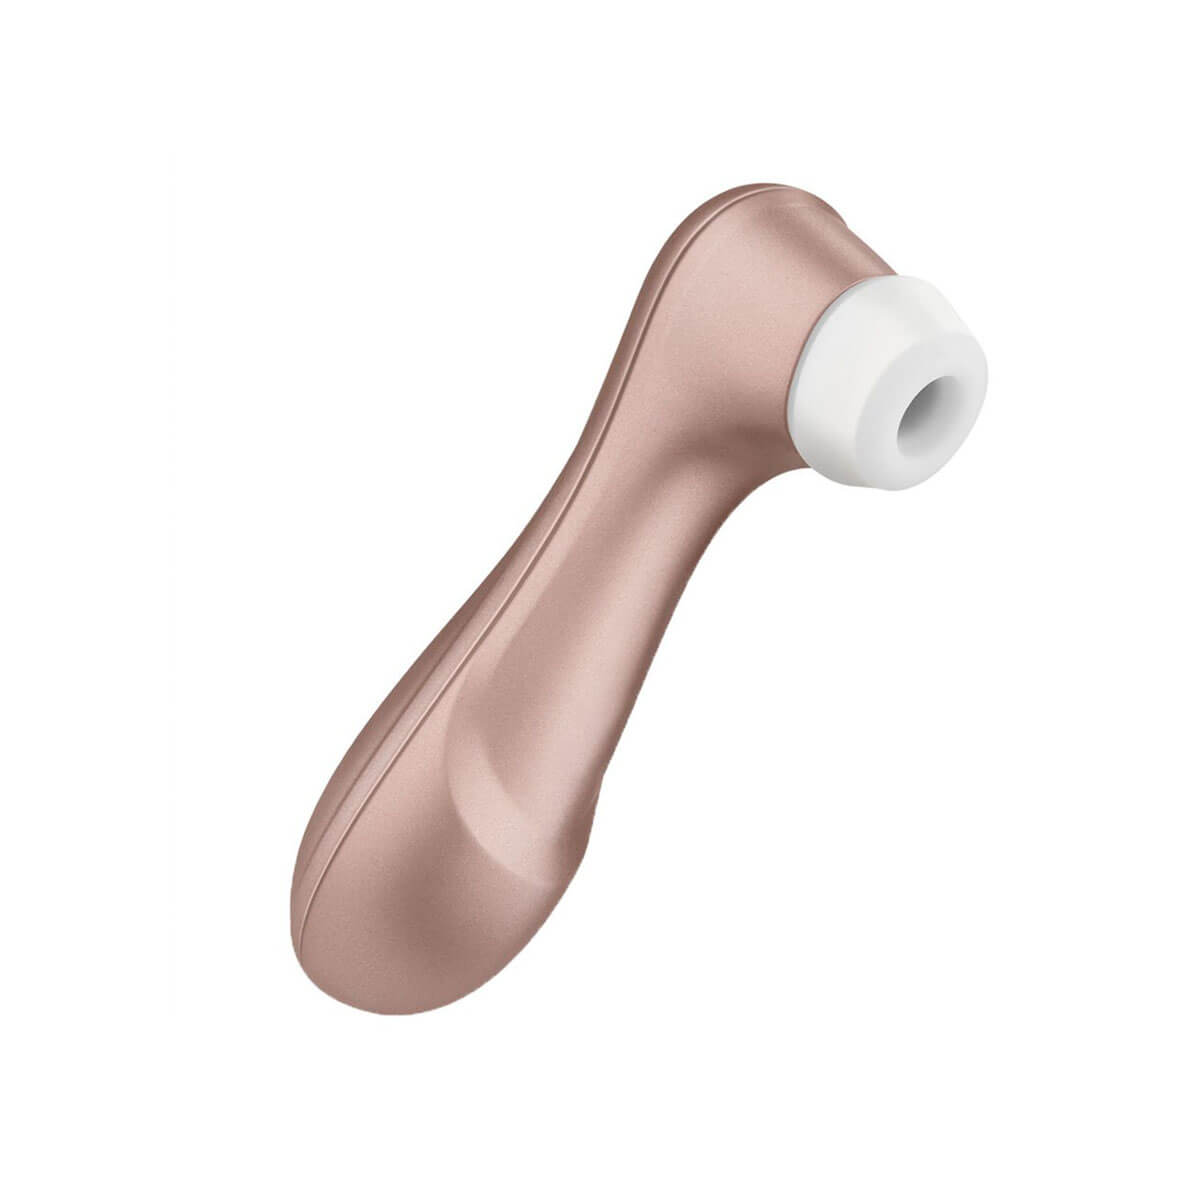 Side view of rose gold air suction vibrator with white silicone nozzle Nudie Co